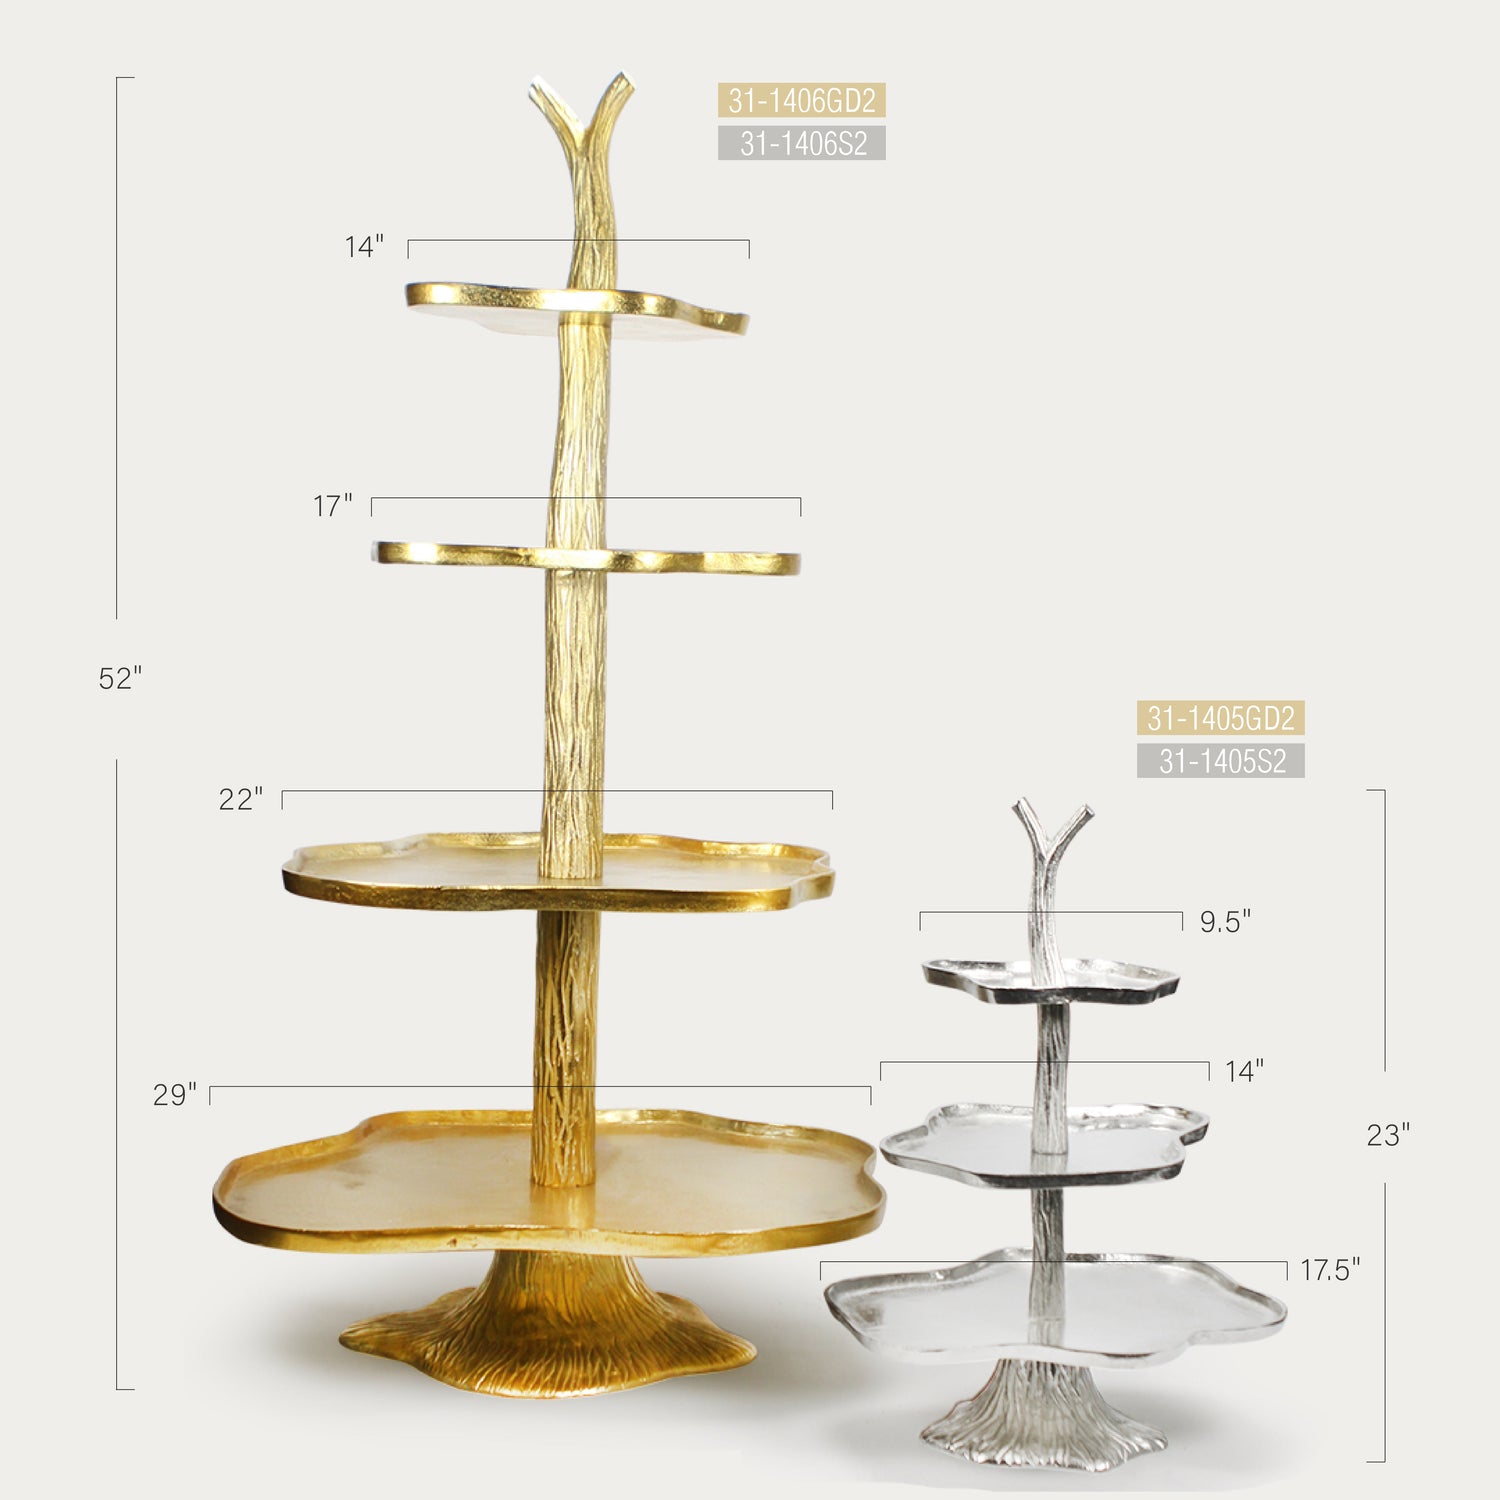 2 Tier Tray Stand | Cake Stand | 2 Tier Serving Tray | silver cake stand |  gold cake stand | 2 Tier Cake Stand | metal Cookie Stand